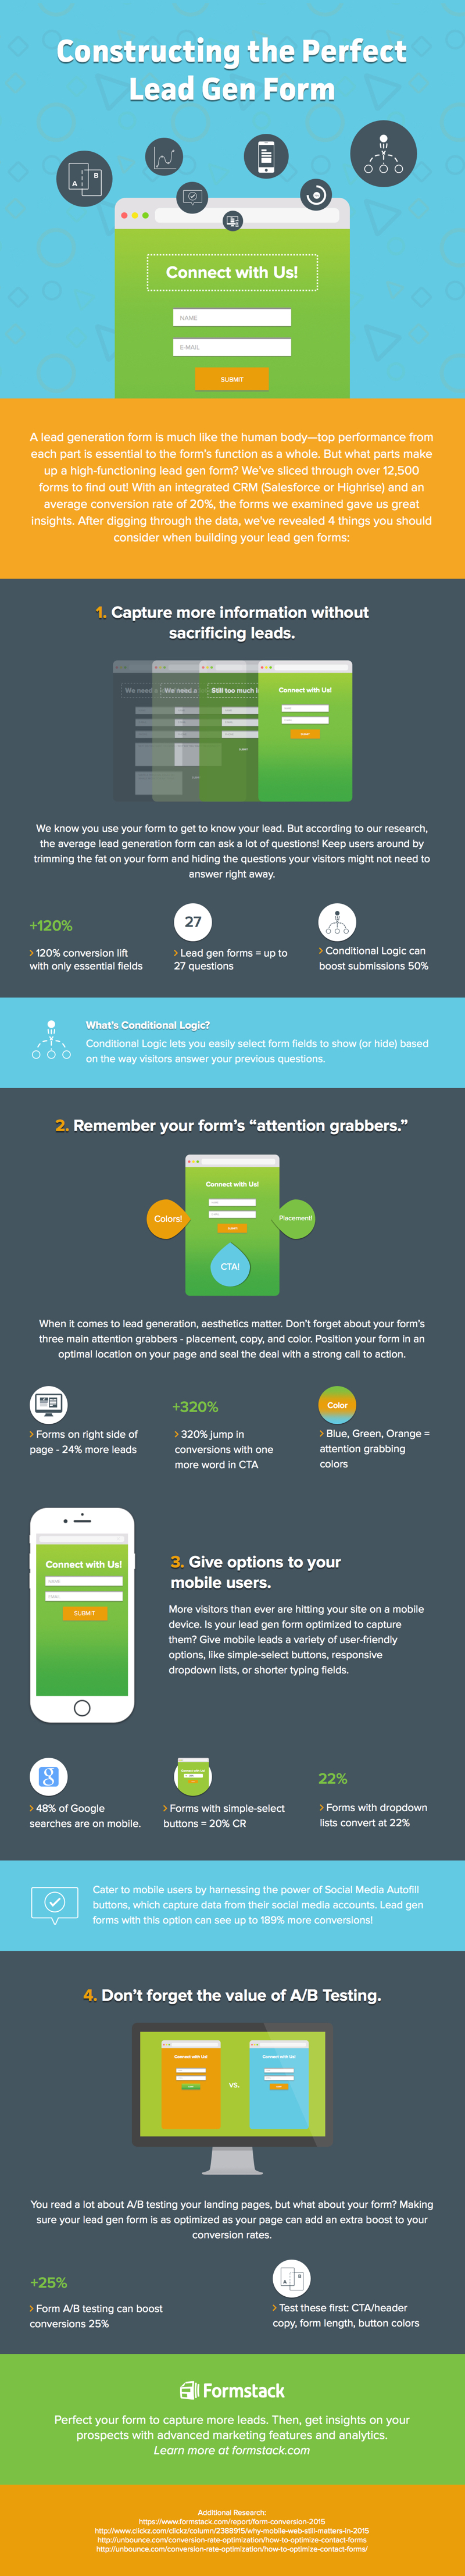 How to construct the perfect lead gen form - infographic